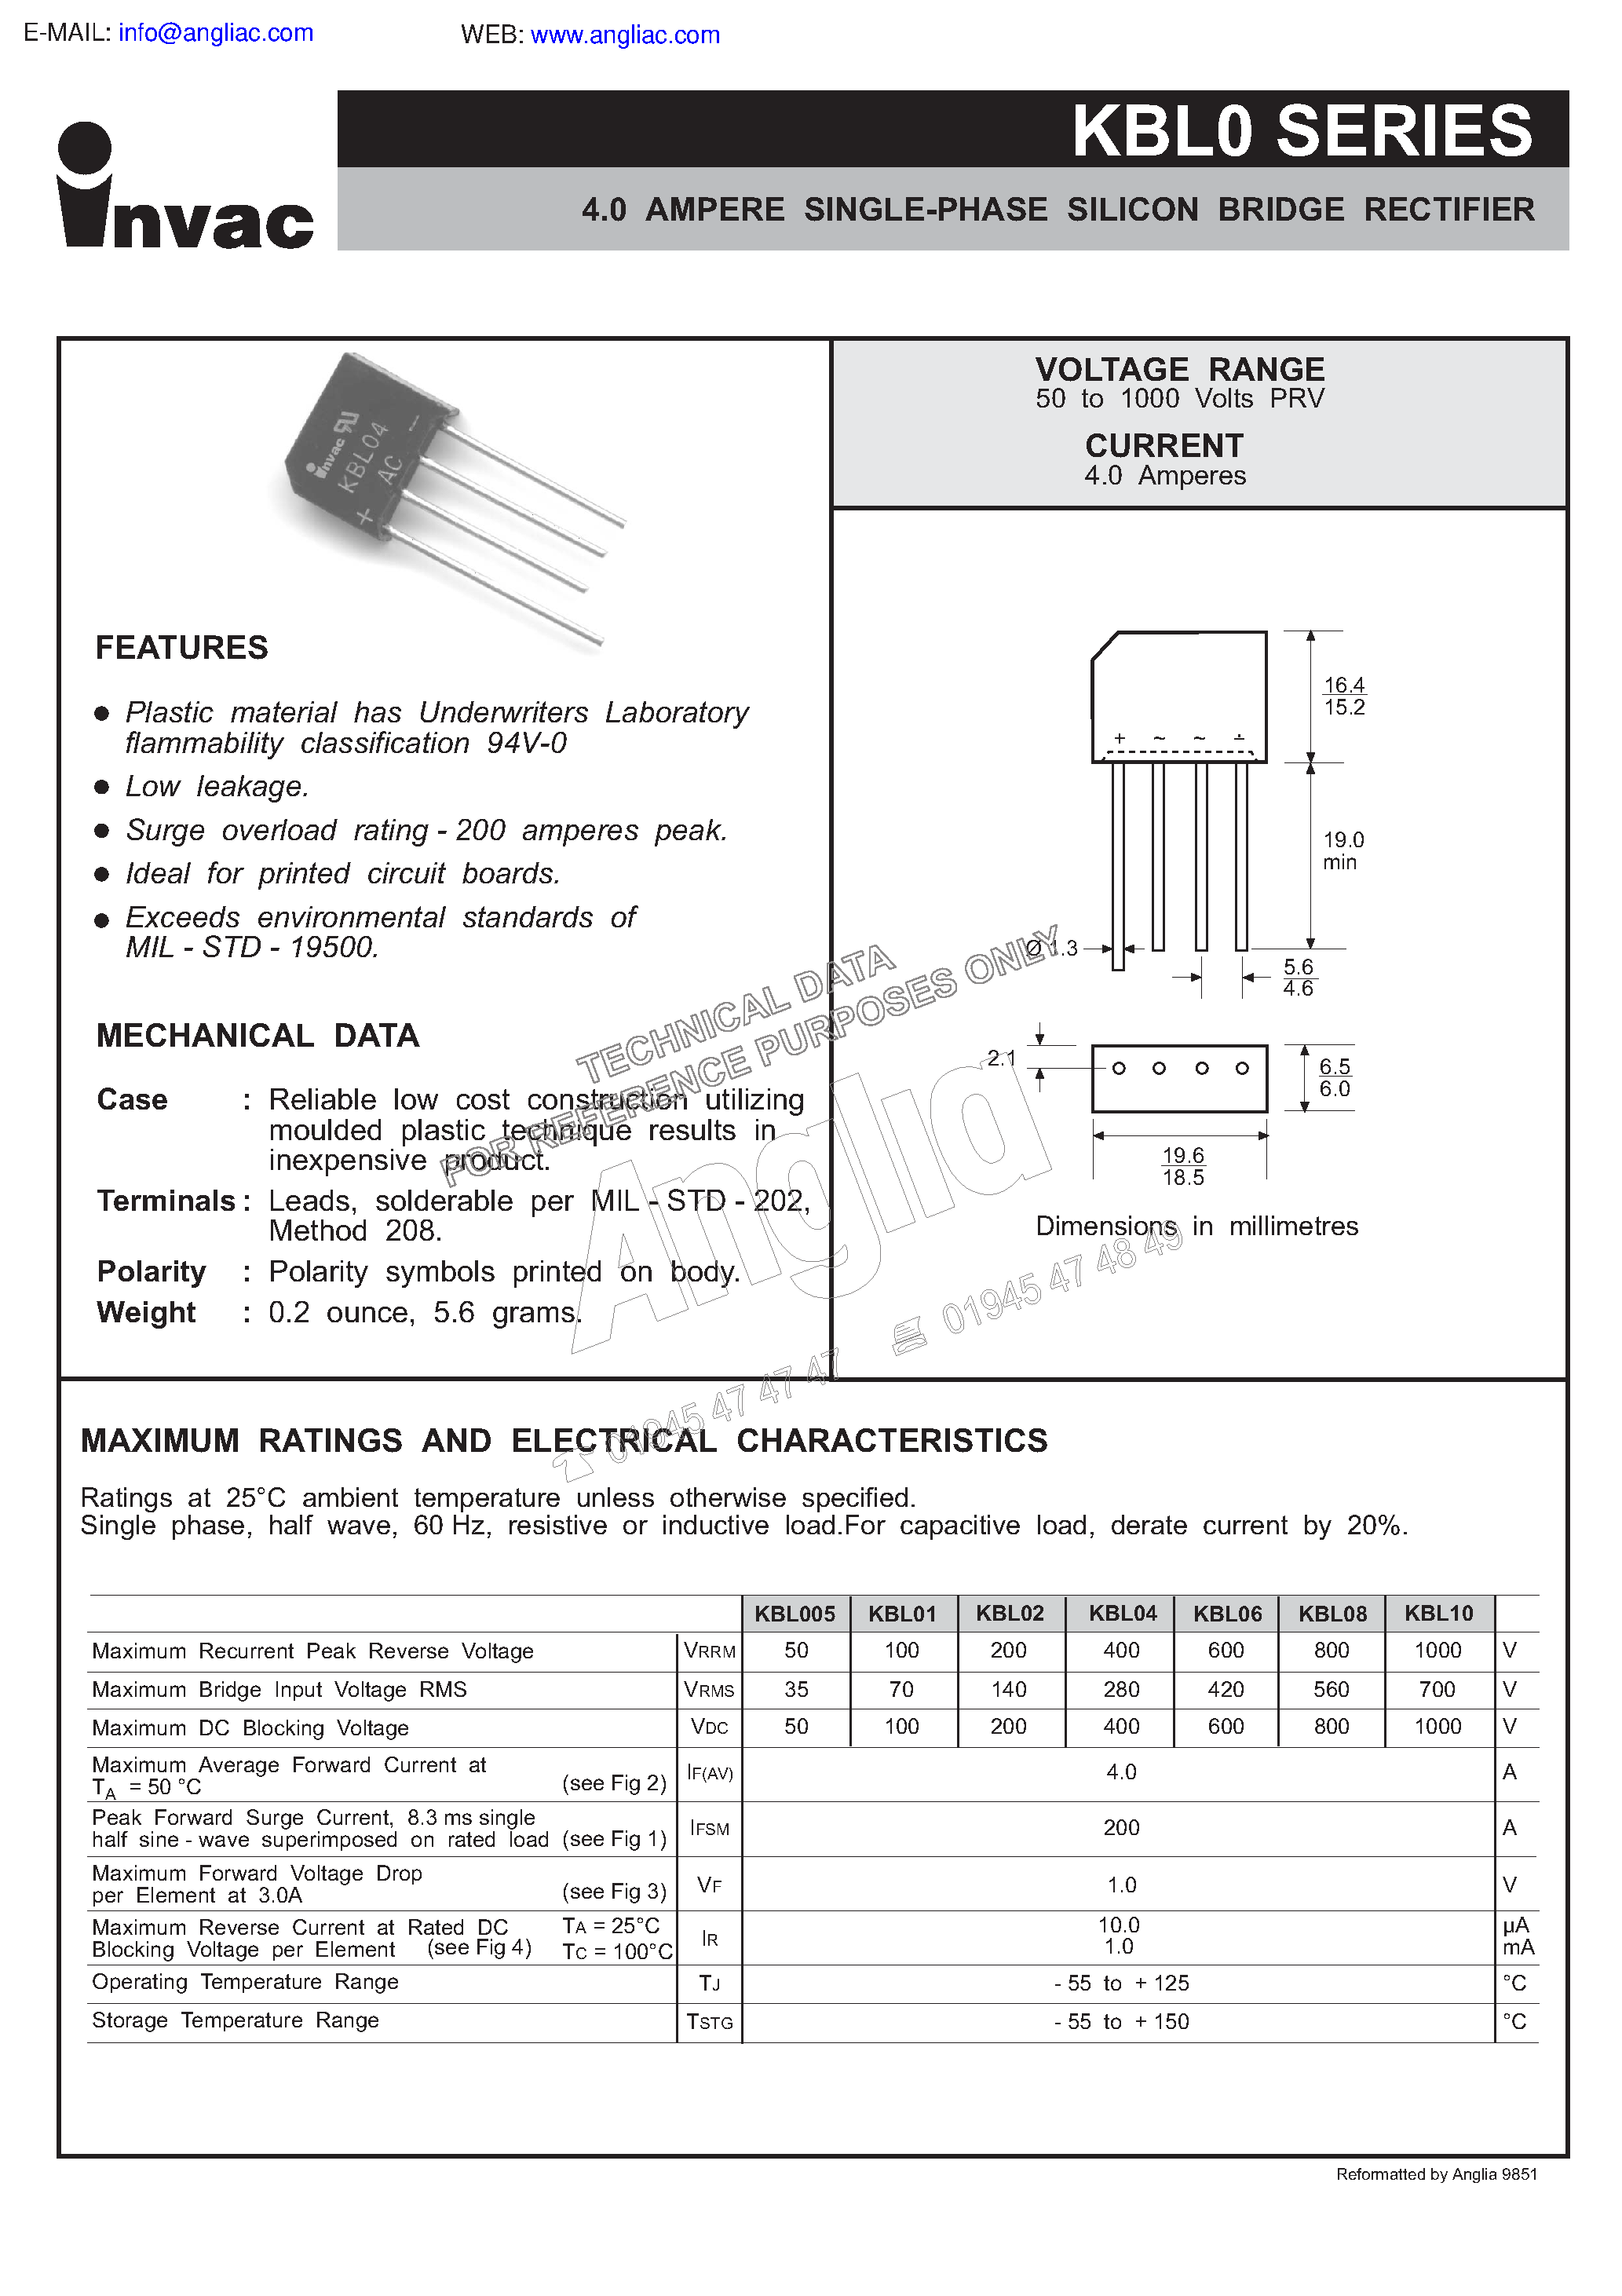 Даташит KBL01 - 4.0 AMPERE SINGLE-PHASE SILICON BRIDGE RECTIFIER страница 1